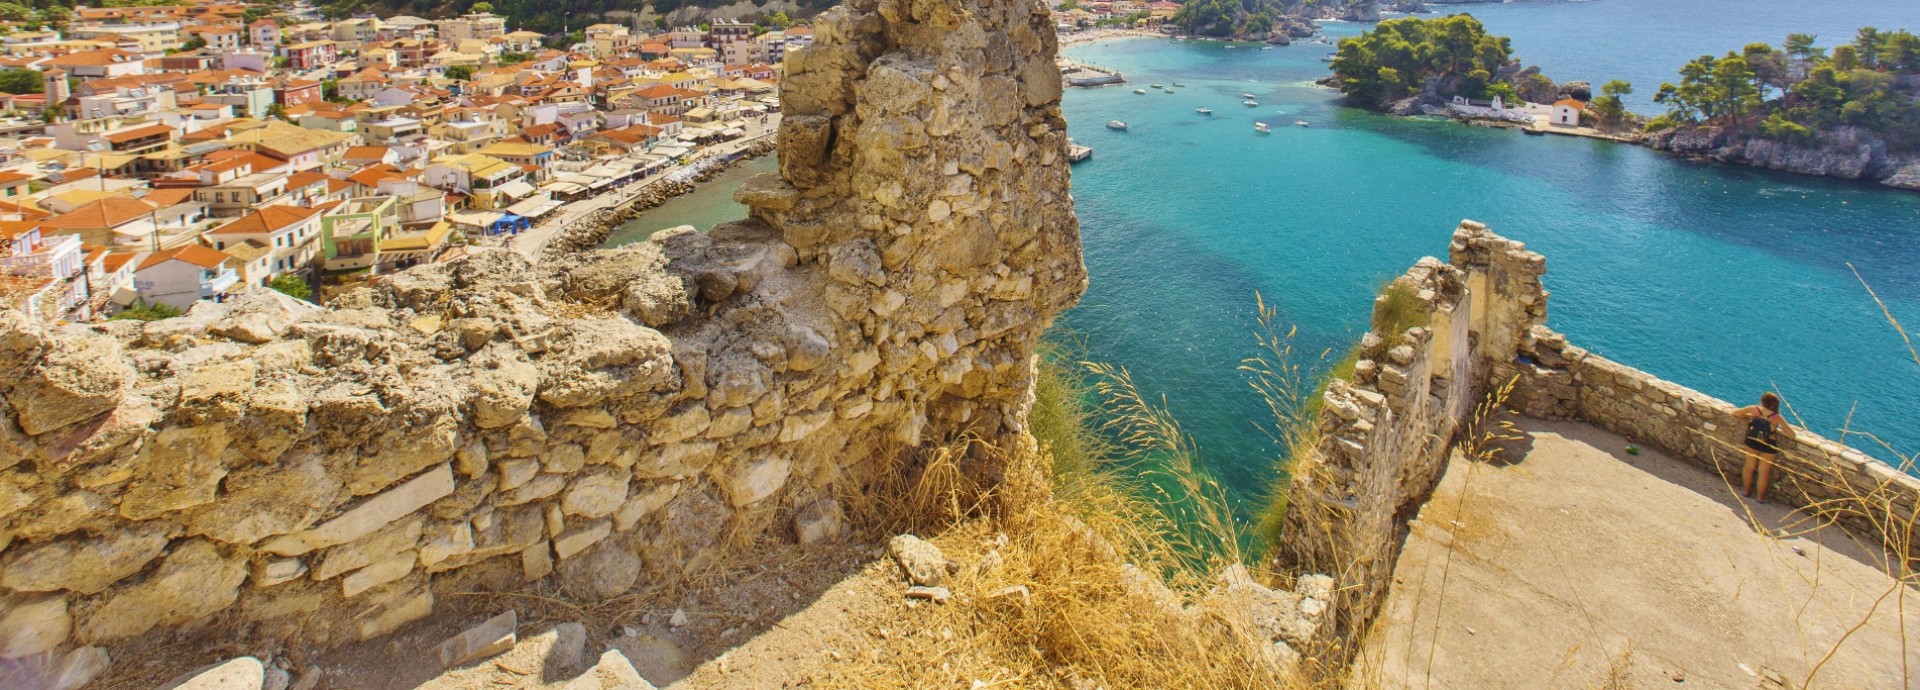 Parga Town View from the Fort - taken by David Bentley